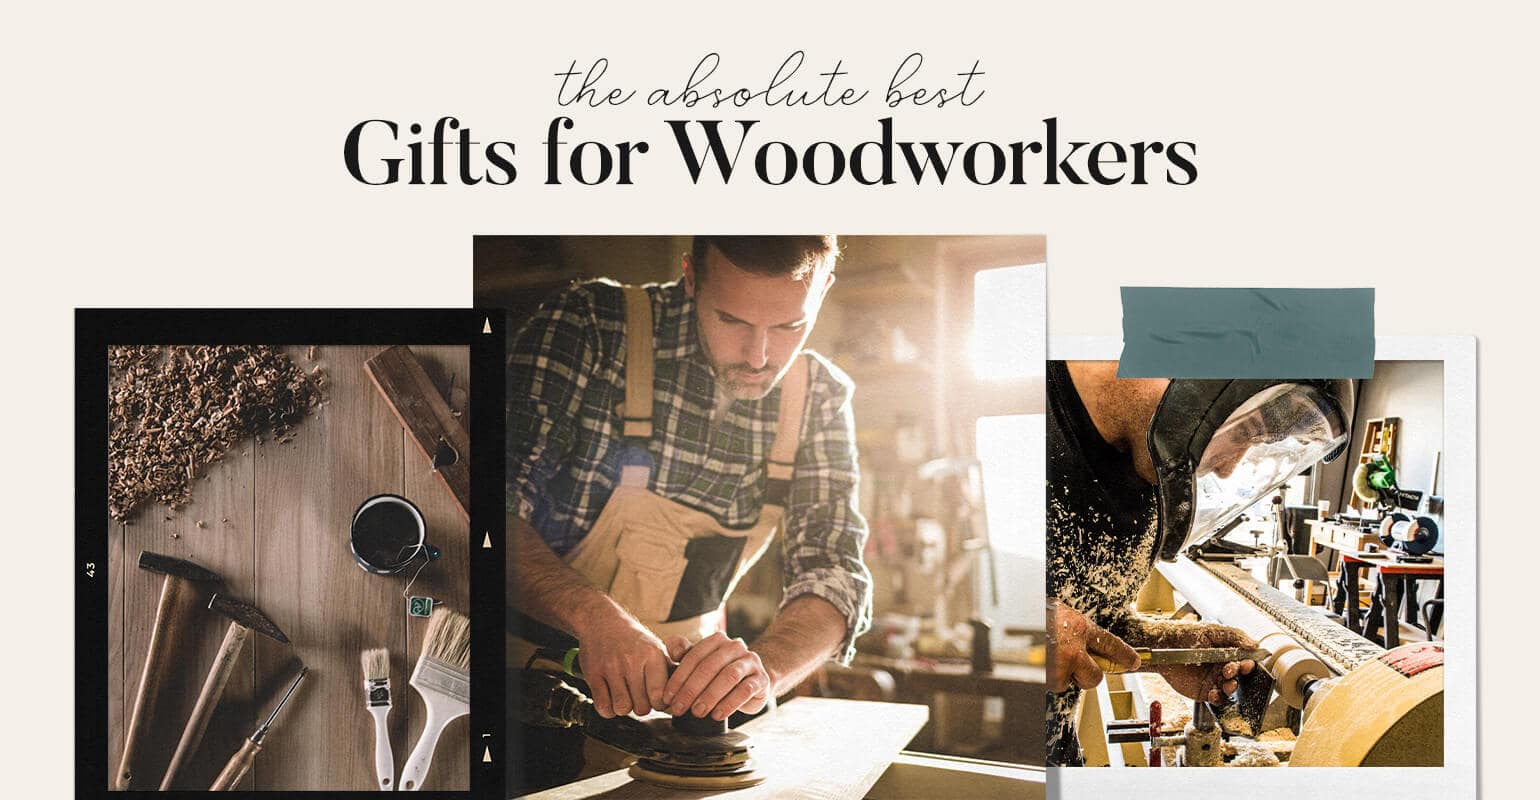 10 Gifts for Woodworkers That Make the Cut